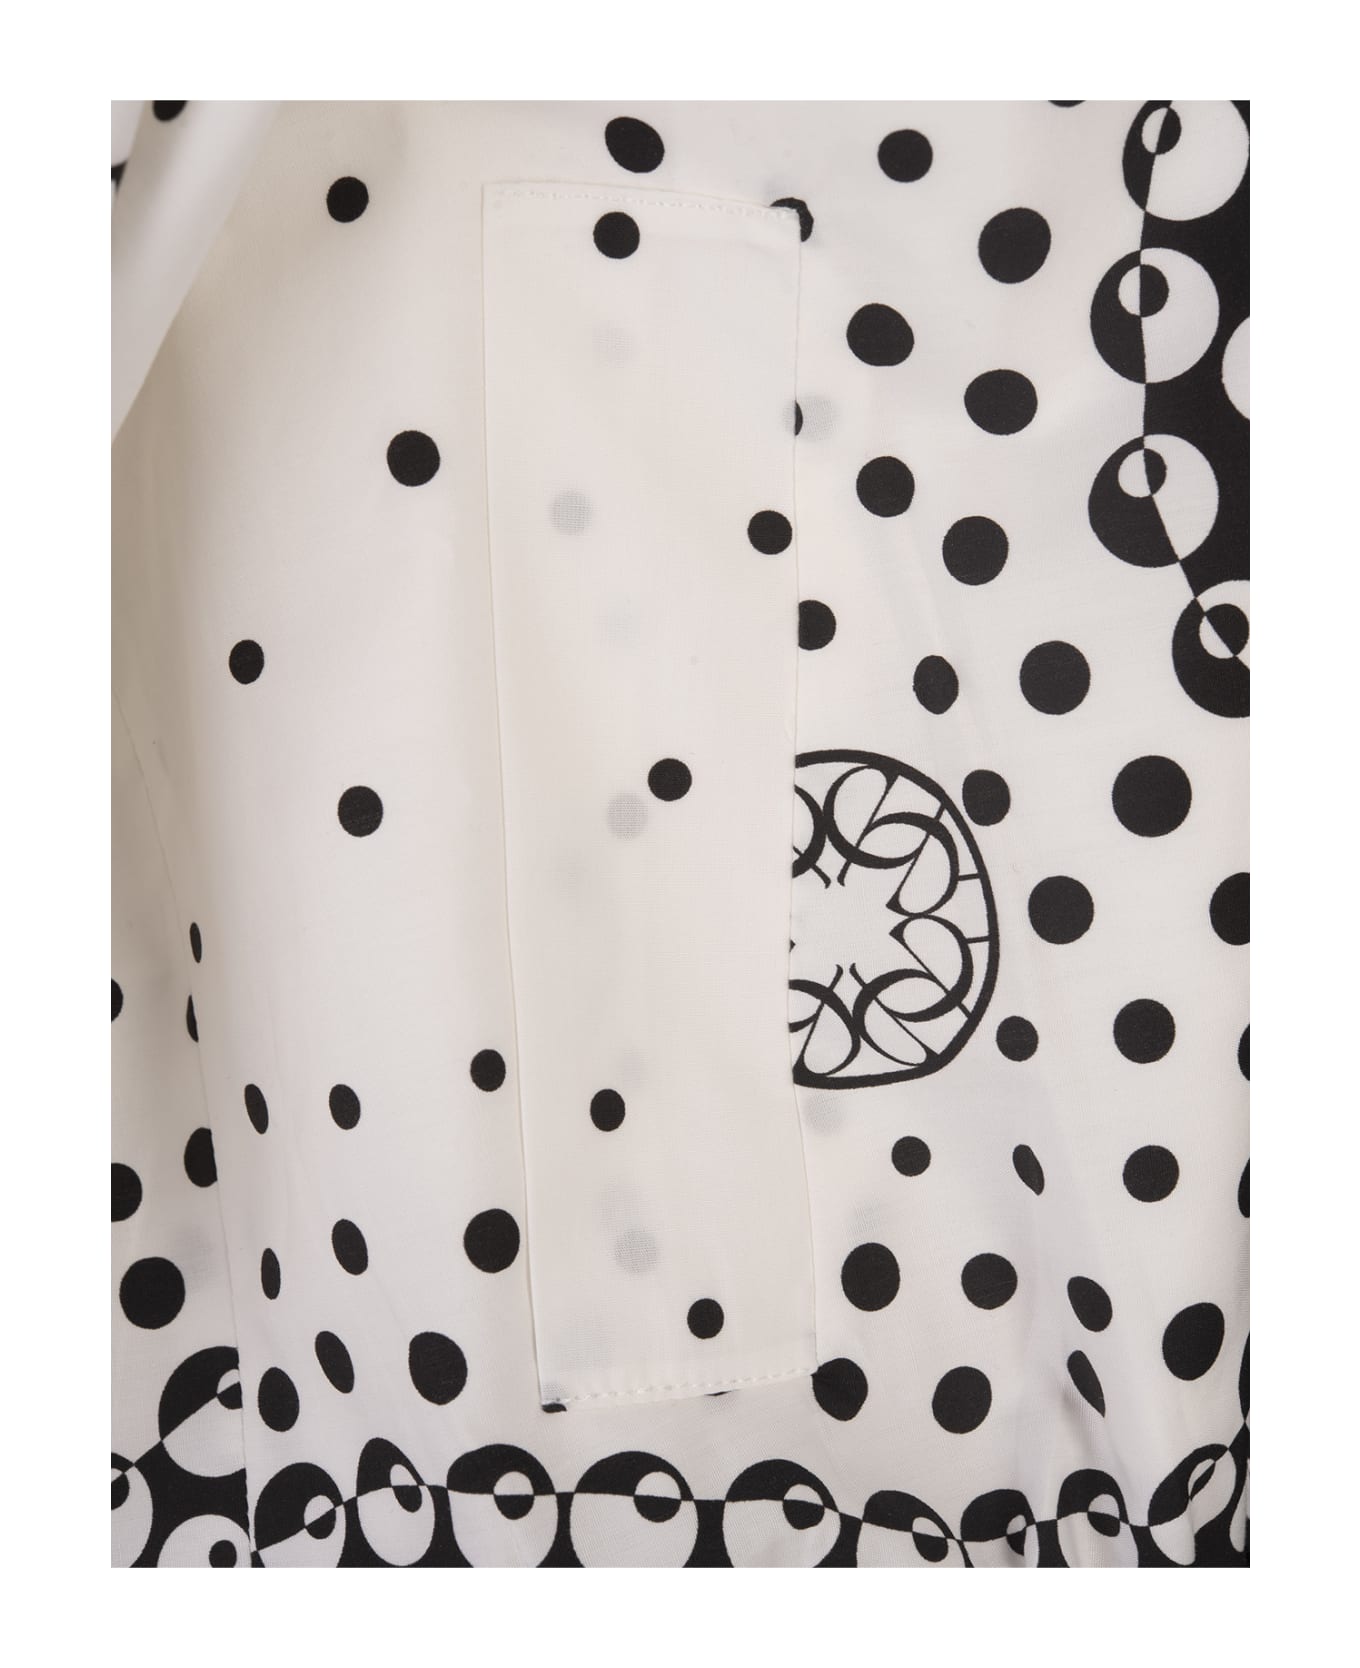 Elie Saab Moon Printed Cotton Bomber Jacket In White And Black - White ダウンジャケット